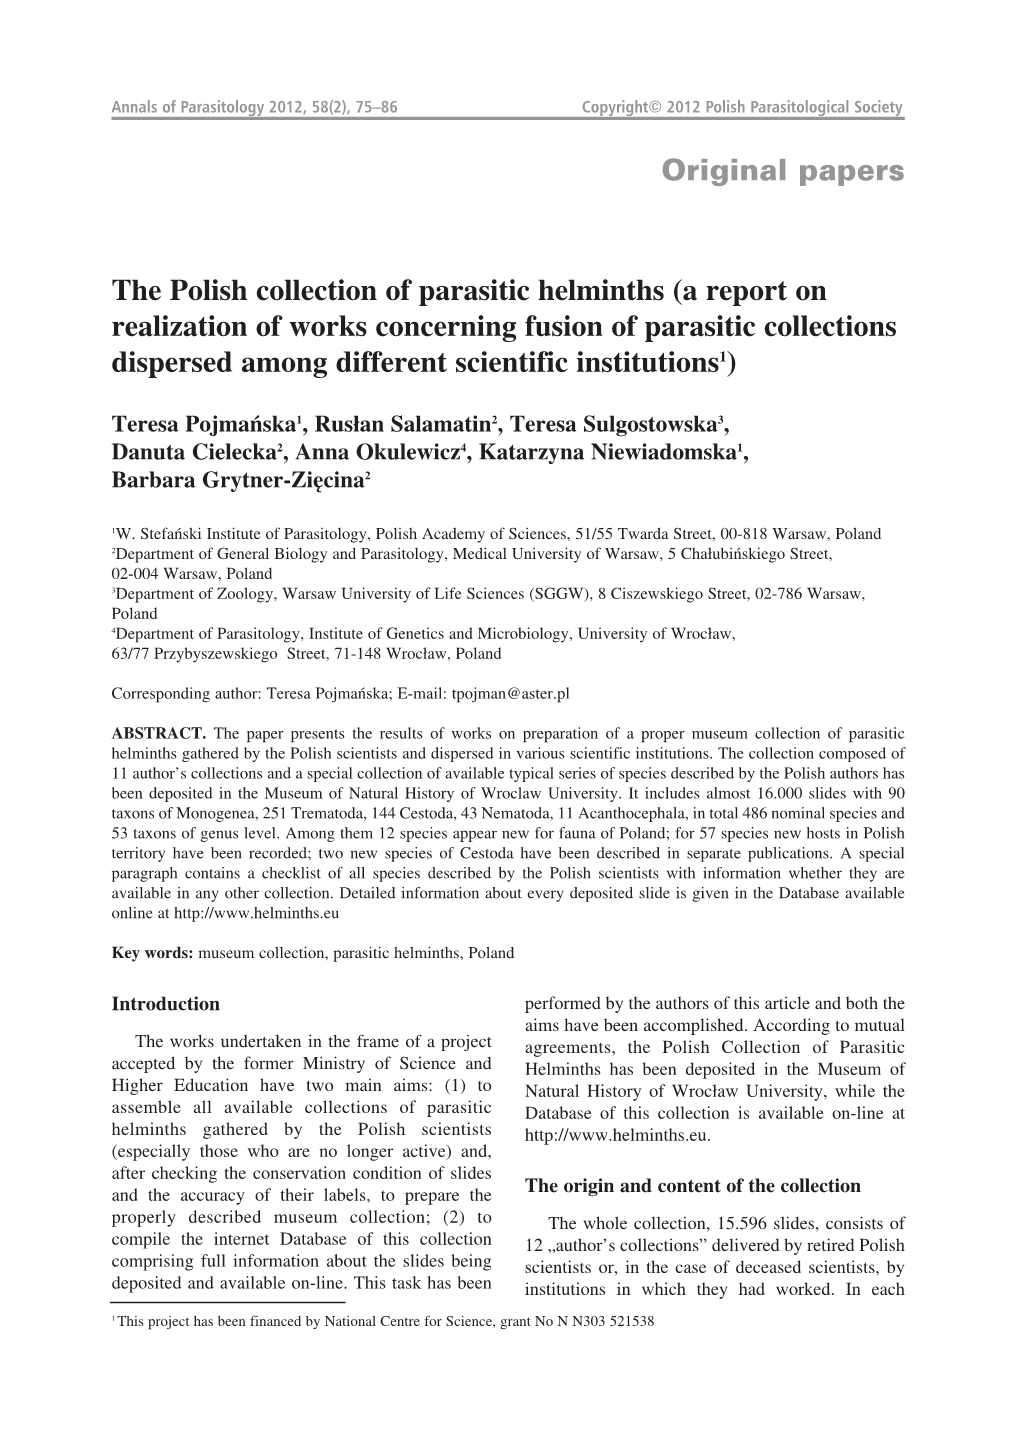 Original Papers the Polish Collection of Parasitic Helminths